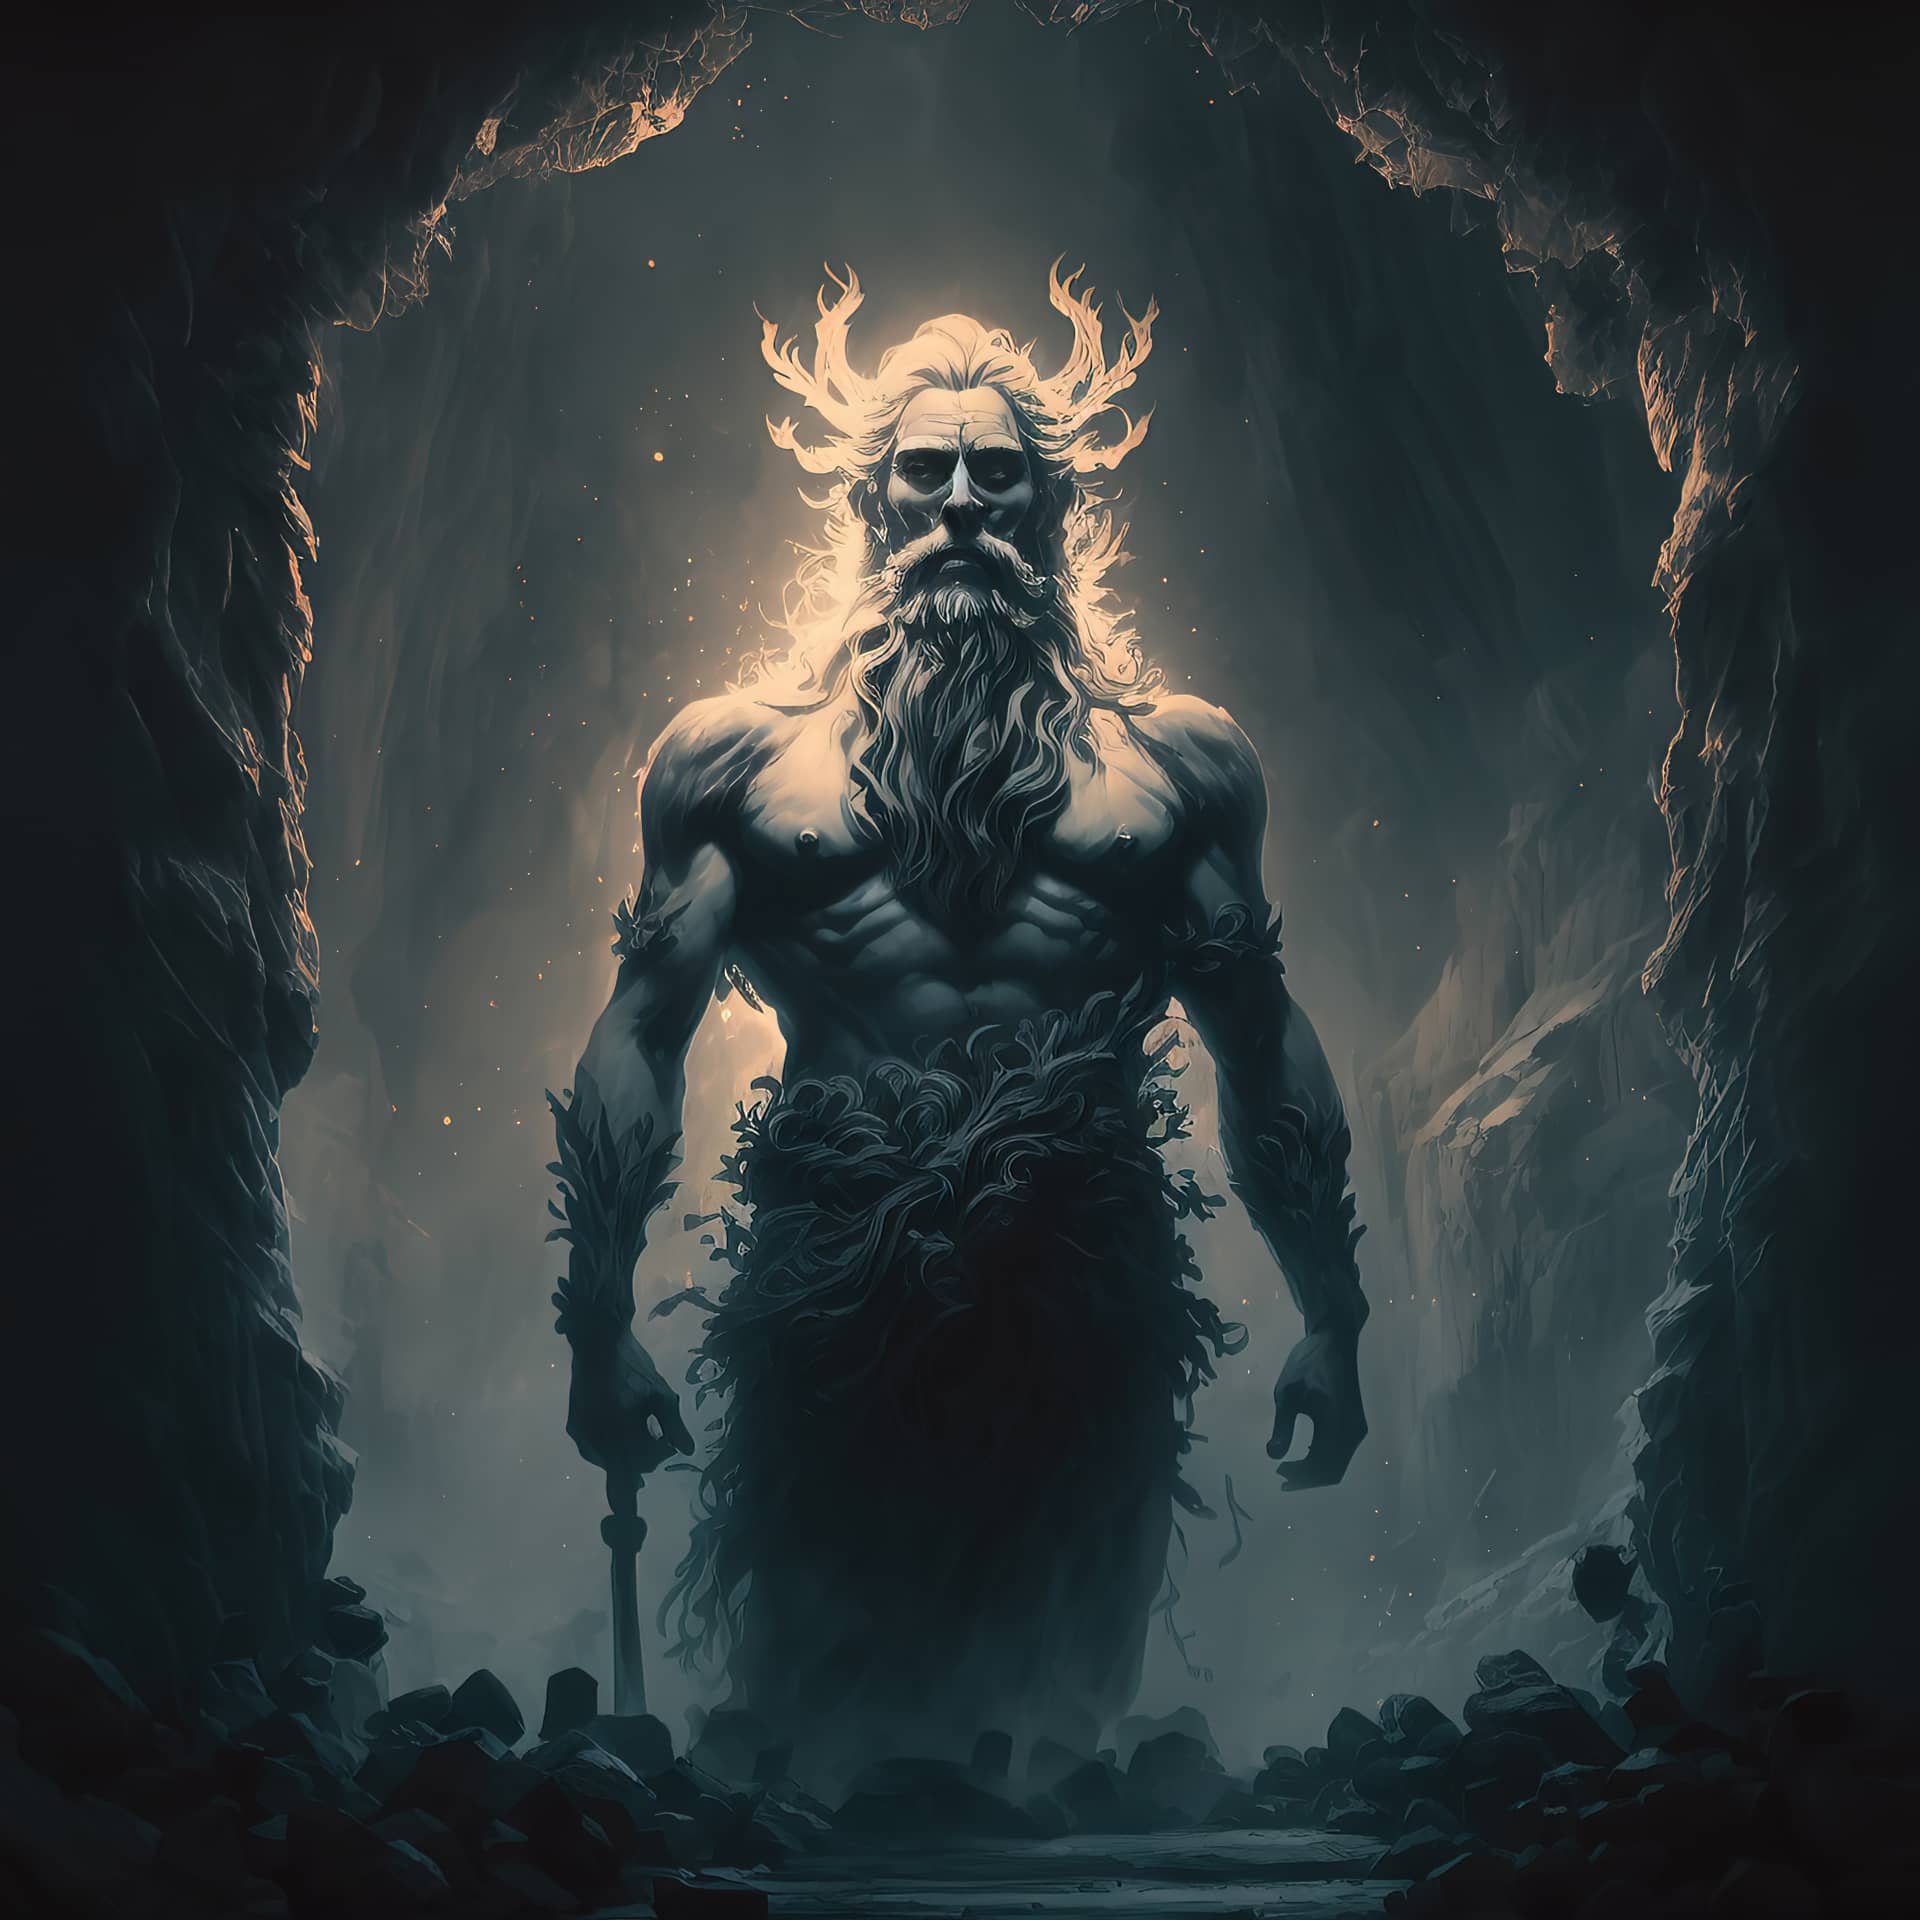 God hades stands full growth cave king underworld god dead